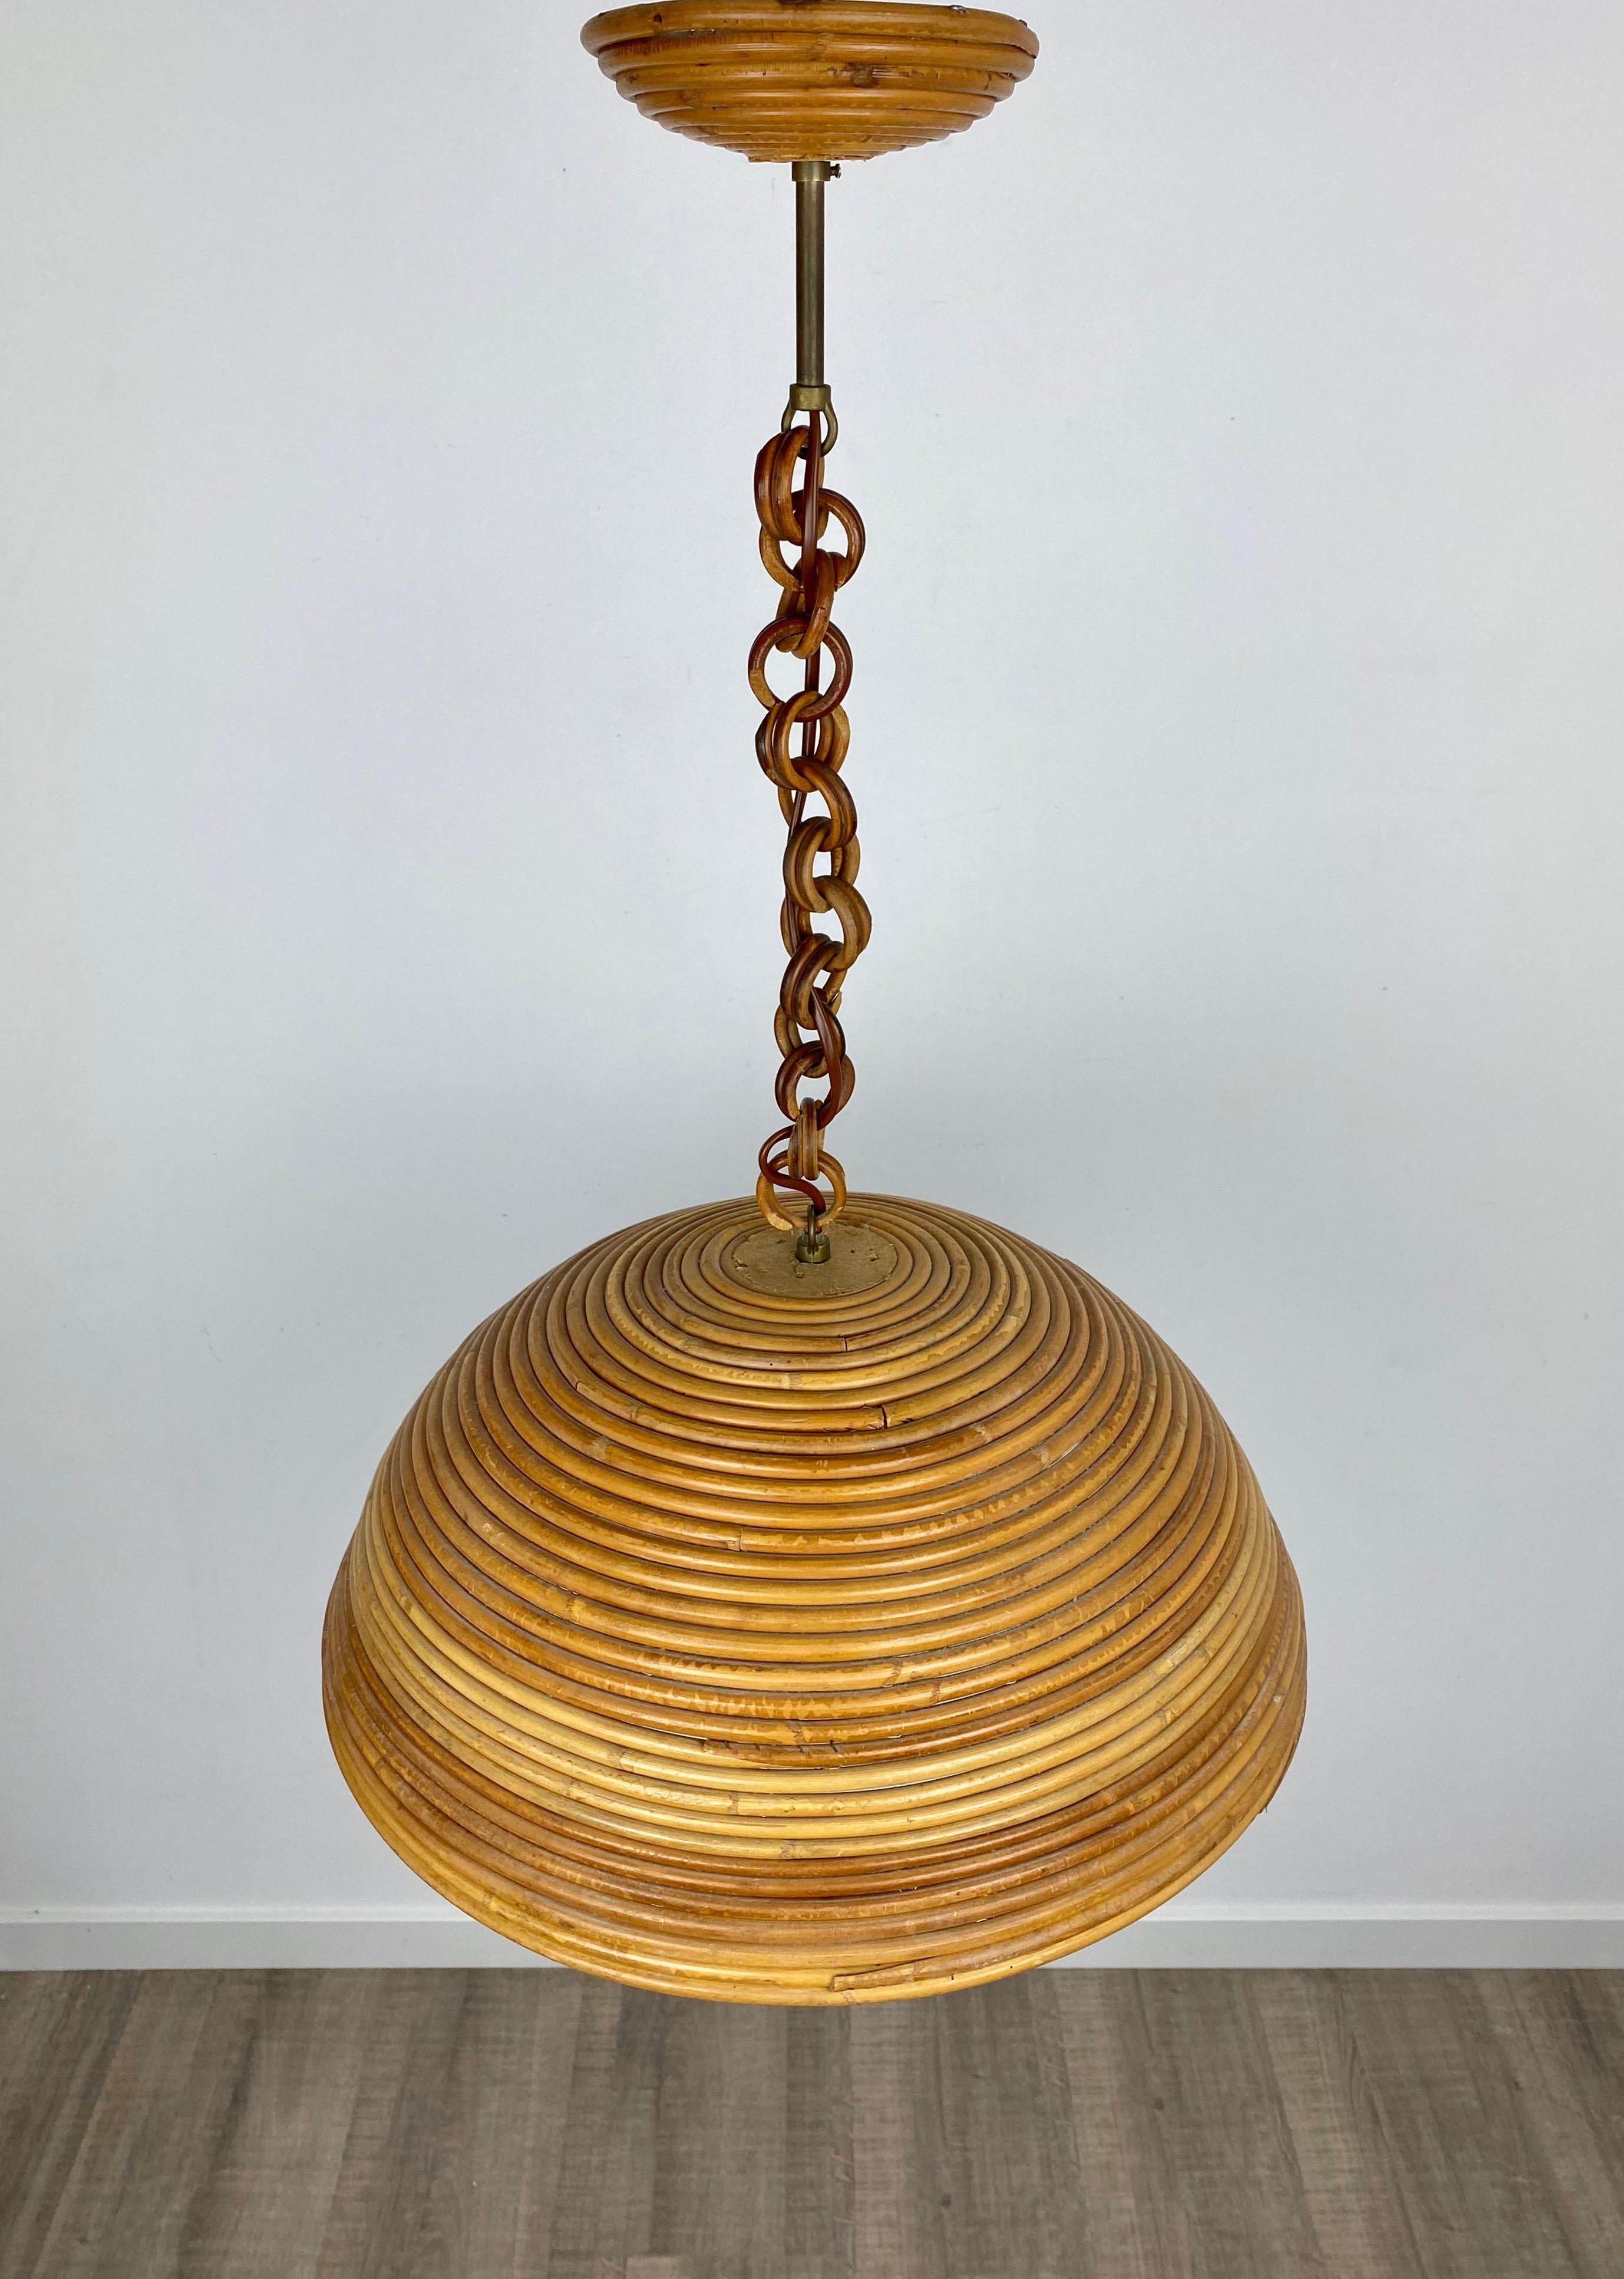 Beautiful midcentury pendant lamp handcrafted in Italy made of rattan. This lamp is a striking appearance in any room. It is a perfect representation of the 1960s period because of its design, quality and functionality.

Dimensions: 
Diameter 46 cm